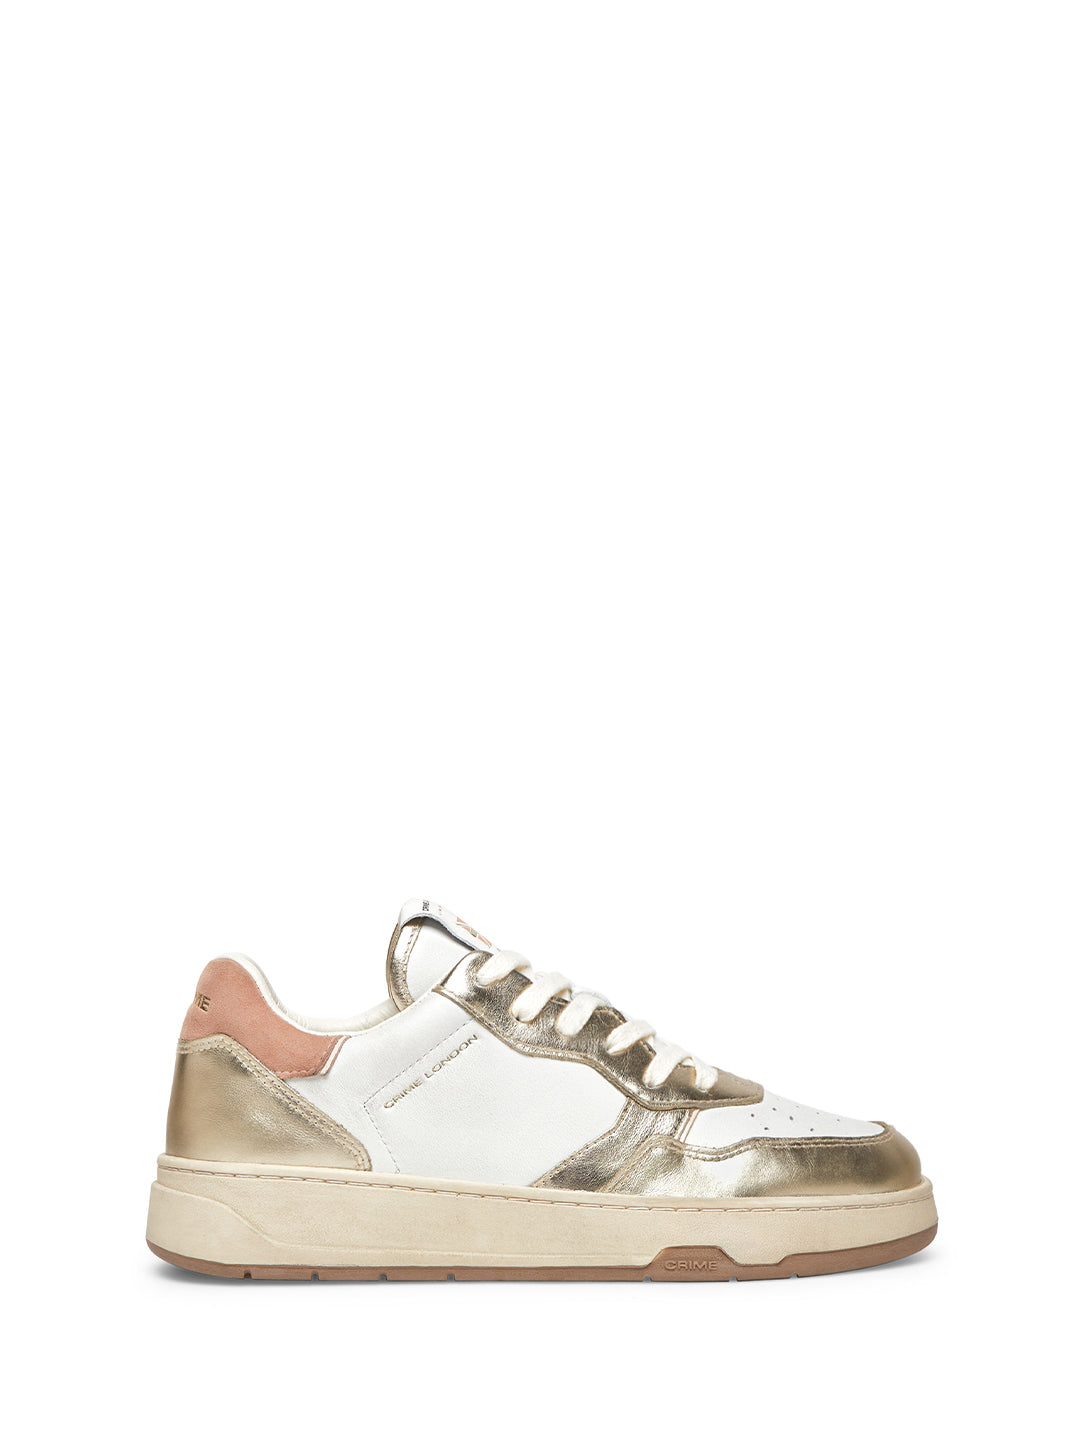 Crime Timeless You Are The Sun sneakers bianco con tab oro